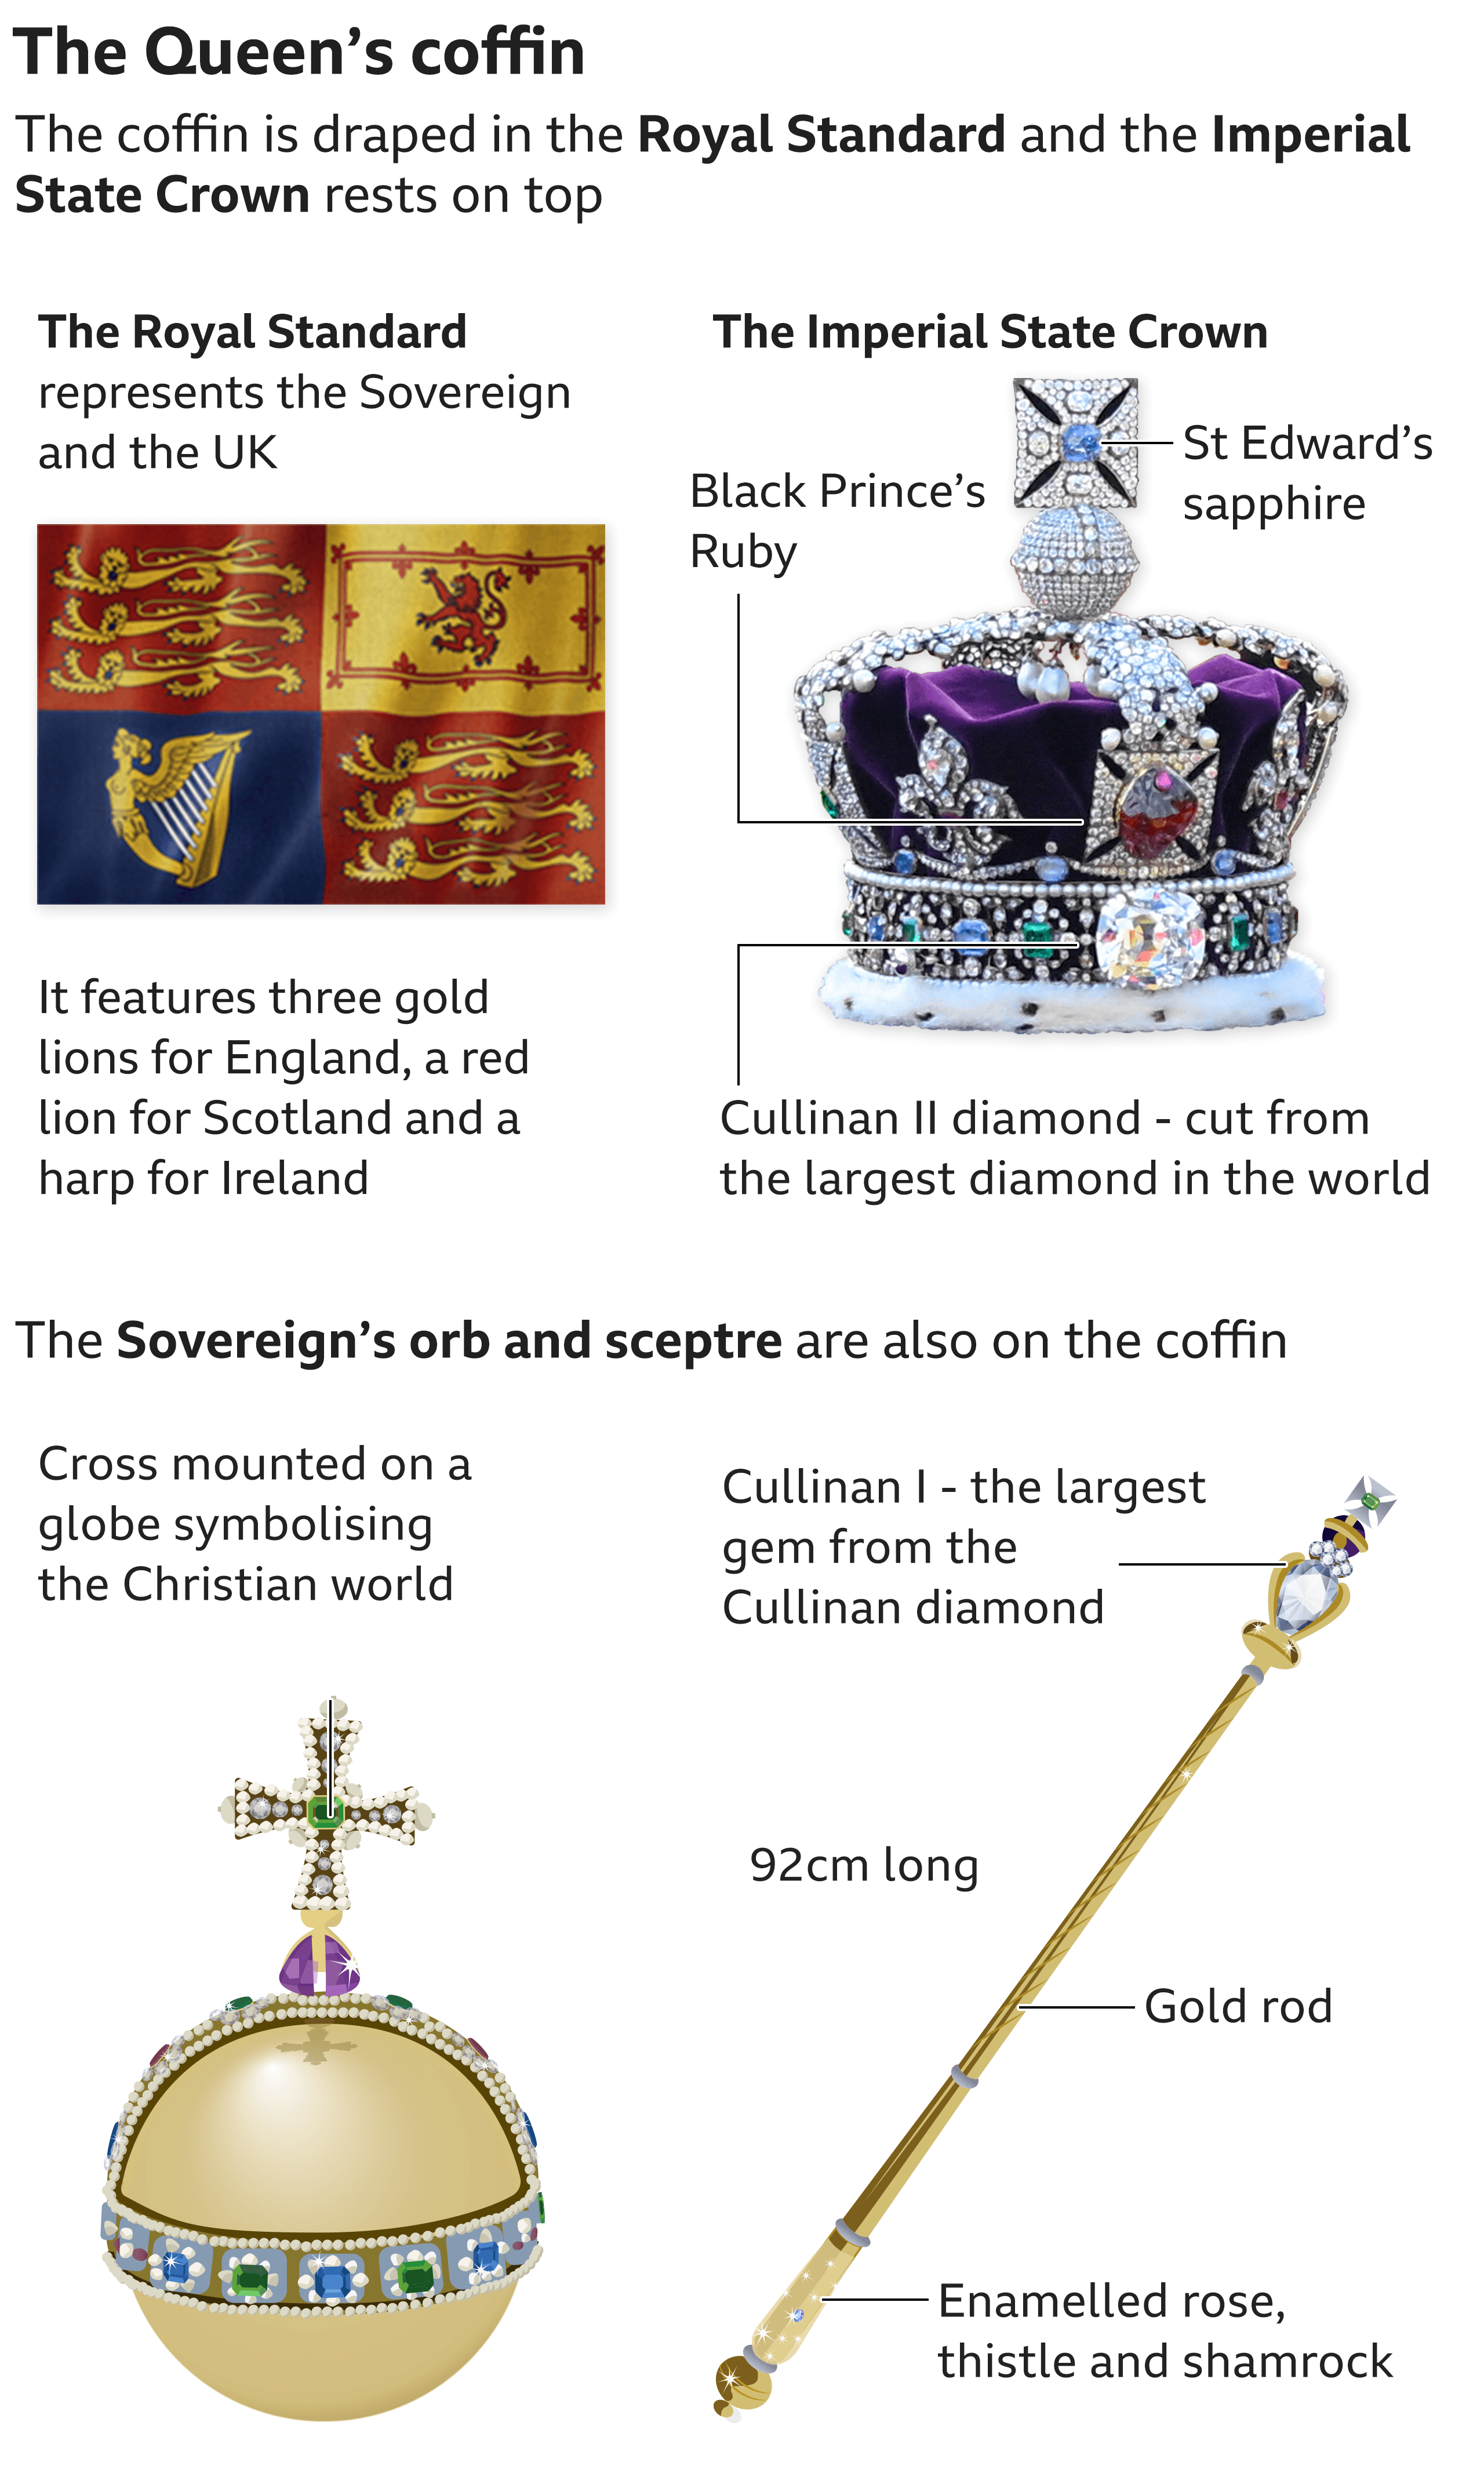 Infographic showing what will be on top of the Queen's coffin: The Royal Standard; the Imperial State Crown; the Sovereign's orb and sceptre